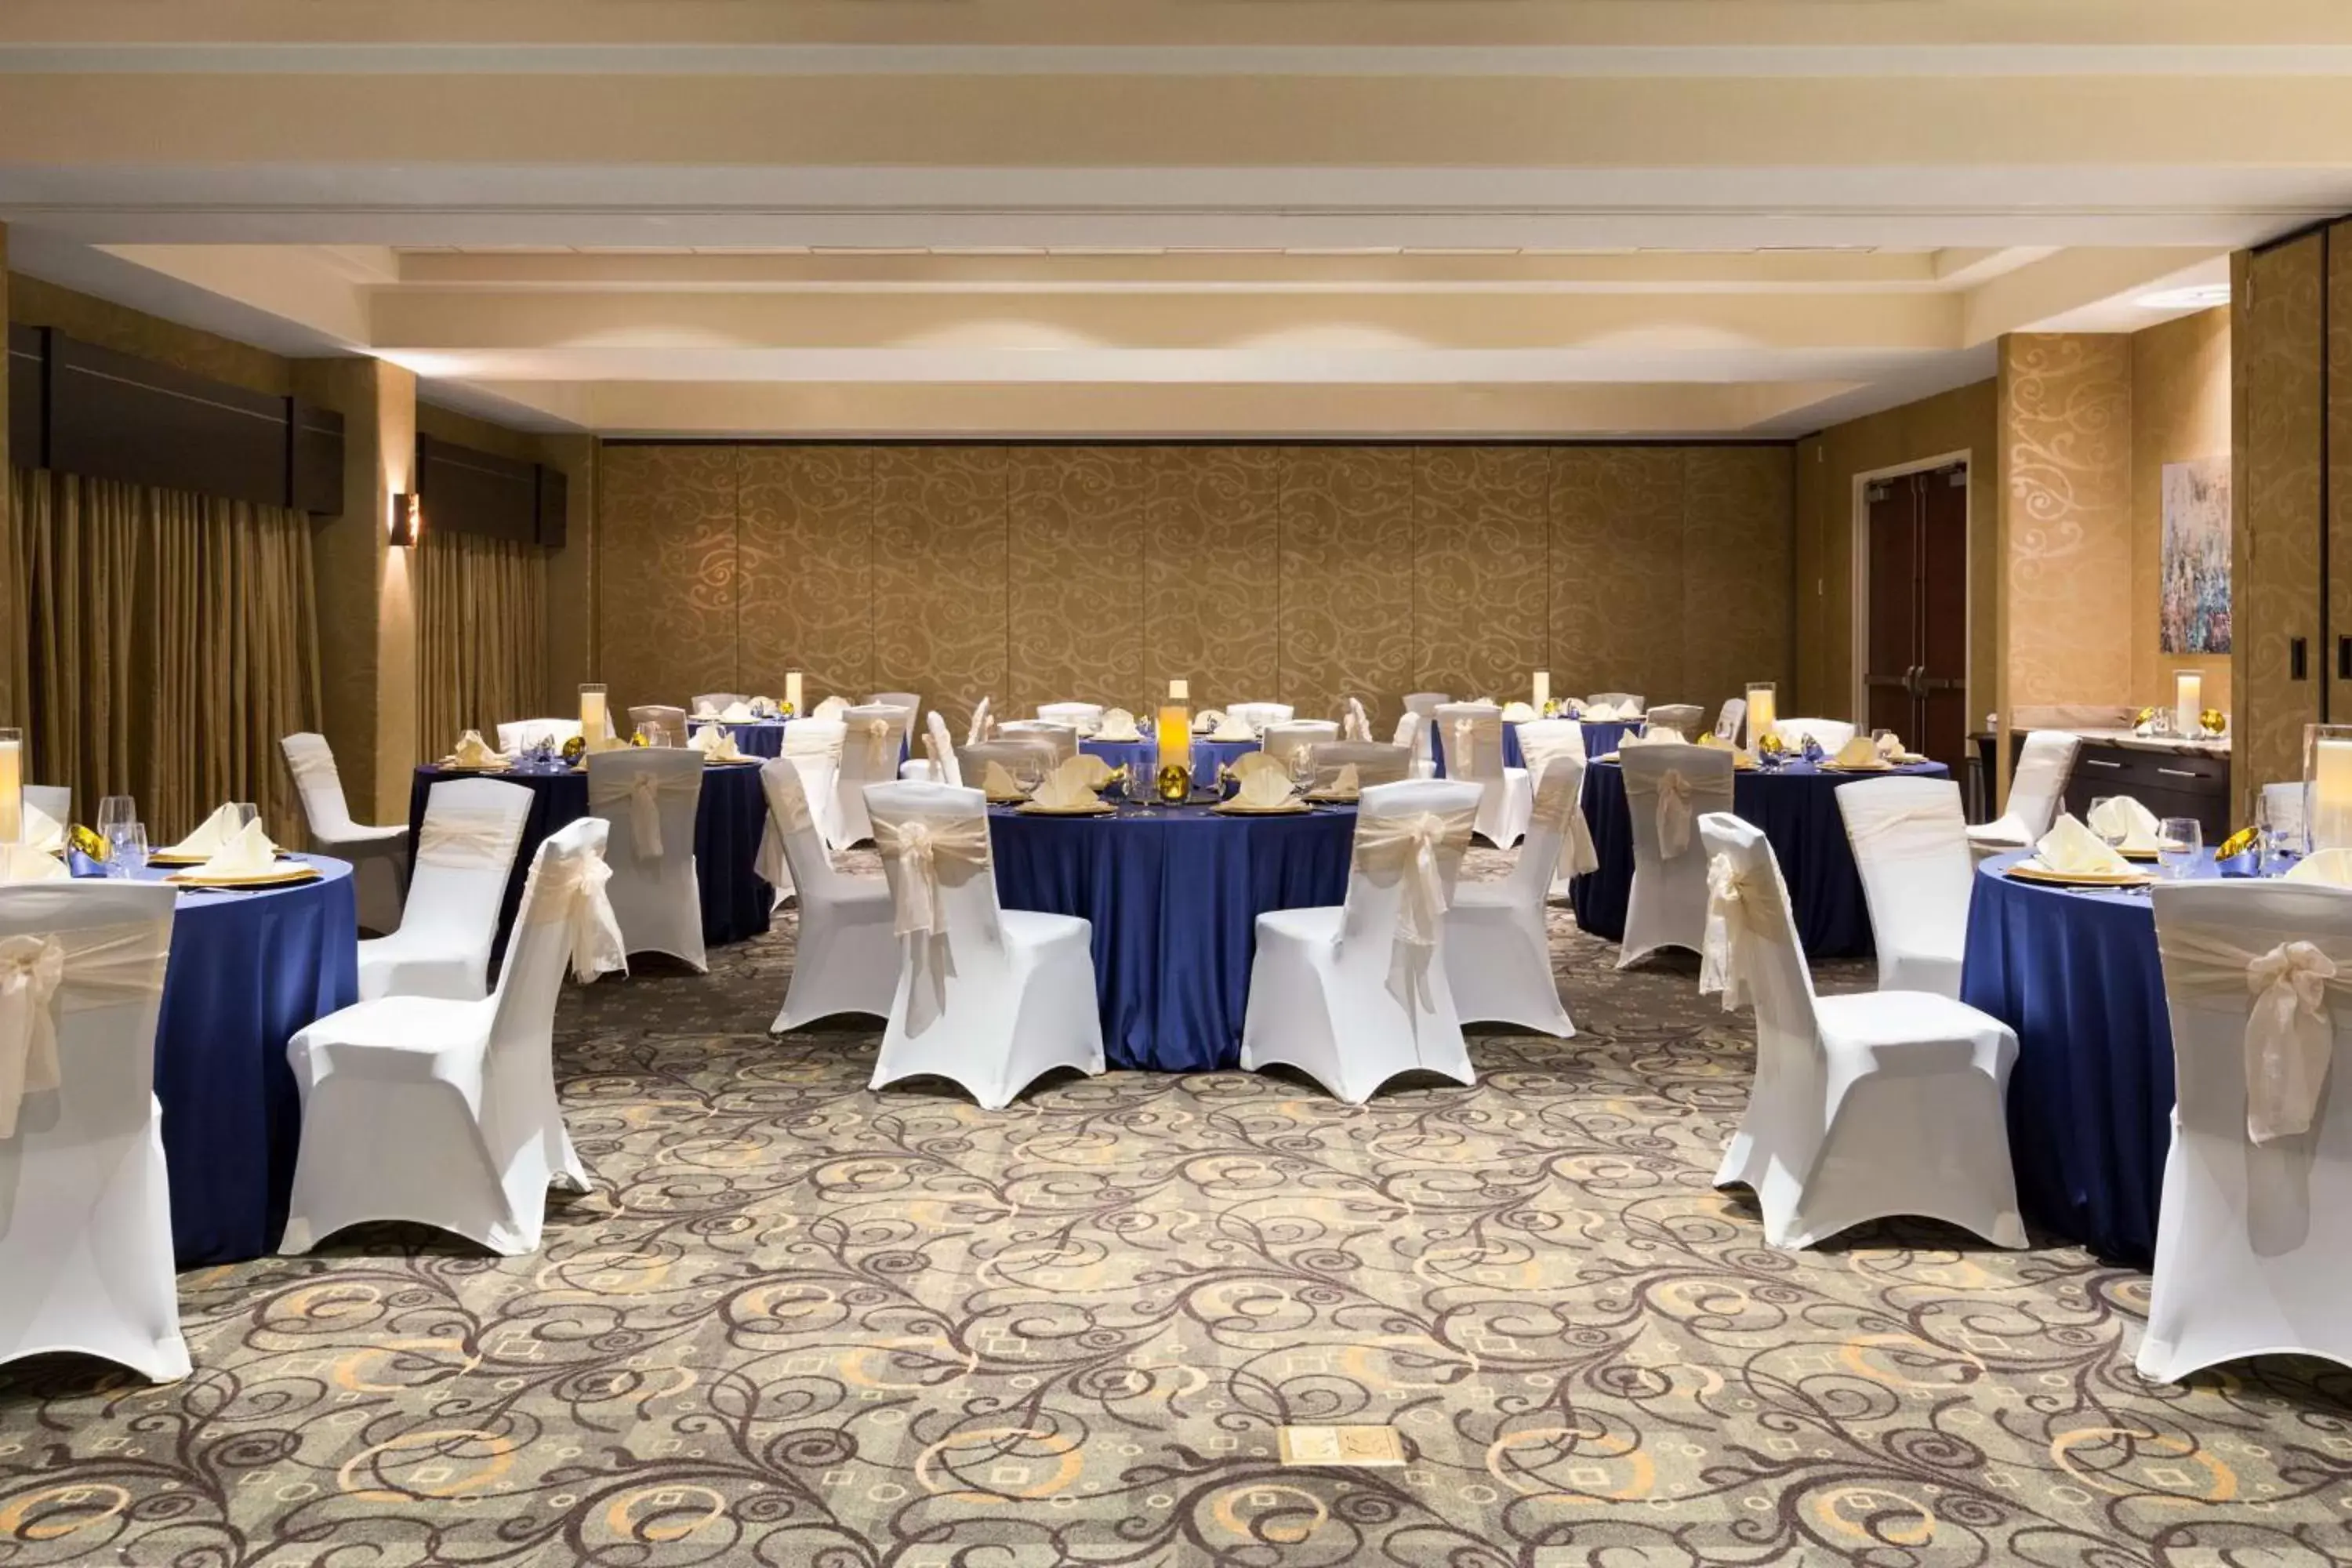 Meeting/conference room, Banquet Facilities in Hilton Garden Inn Houston Northwest